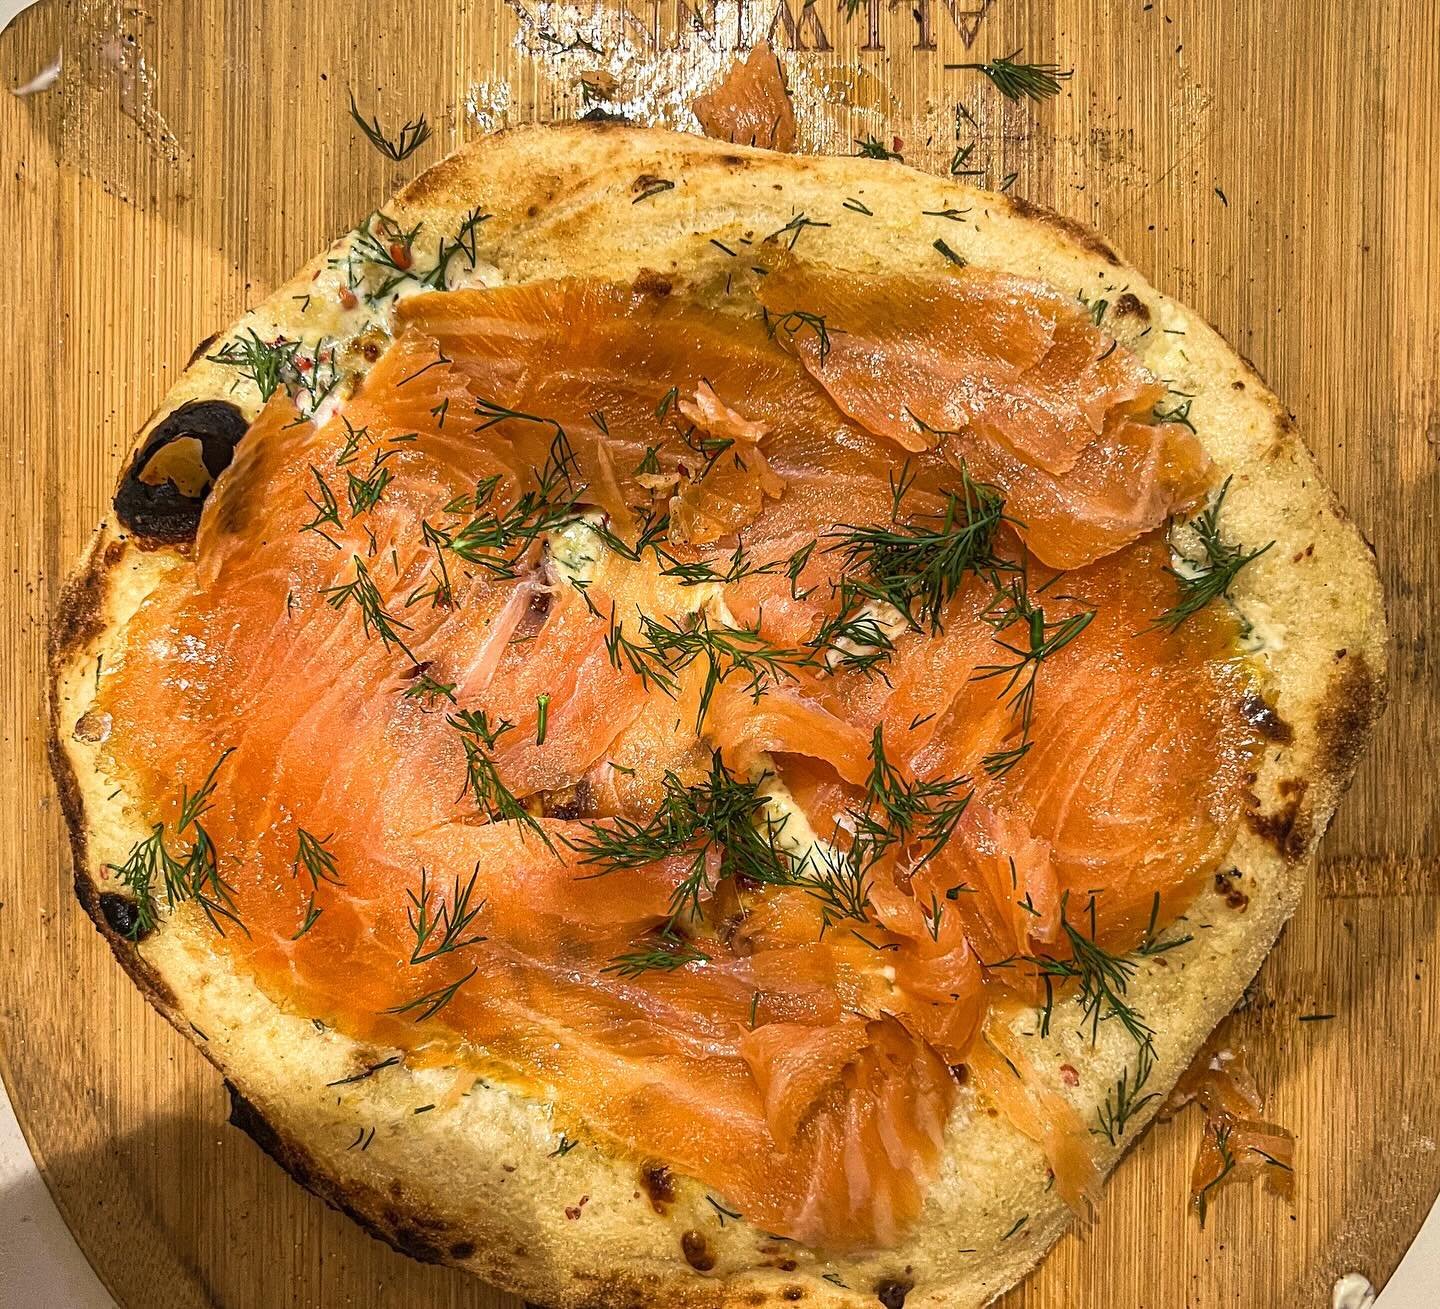 May 18 was #OoniDay so I celebrated with a dozen friends making an updated #nordicpizza (cr&egrave;me fra&icirc;che, pink peppercorn, dill and lemon under smoked salmon) and a pretty classic #margheritapizza  The @oonihq Koda is an amazing oven - fou